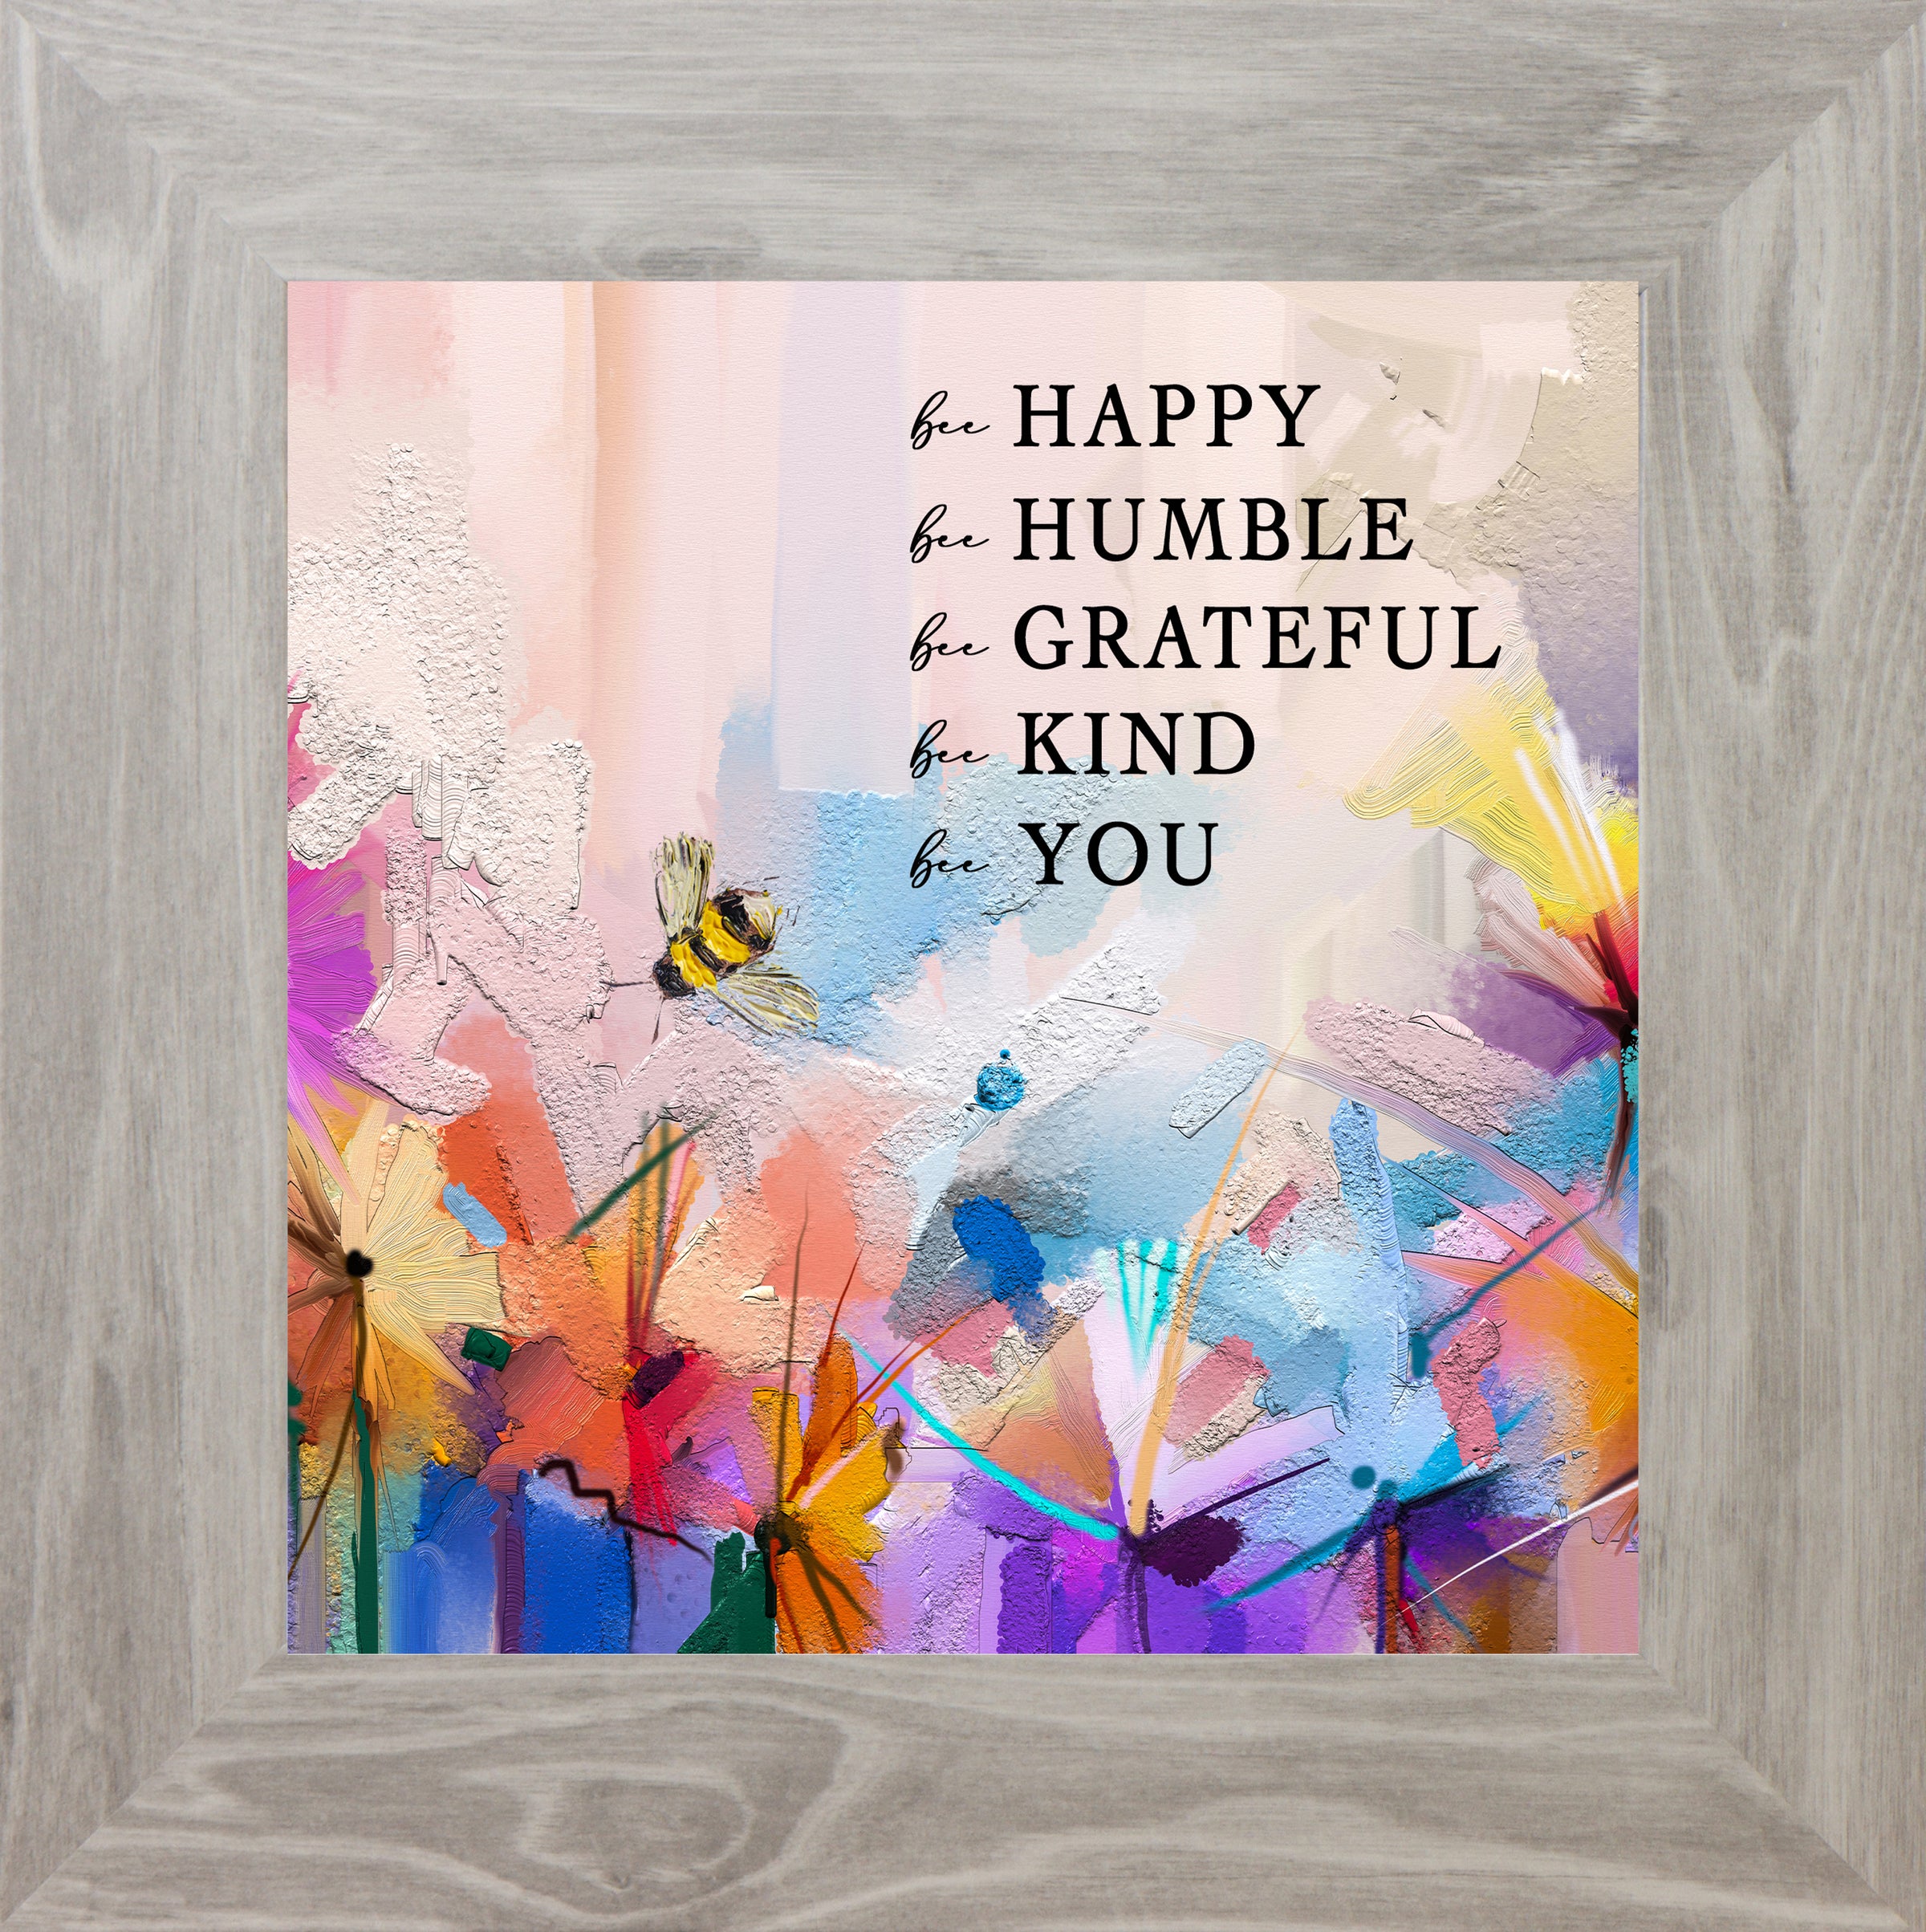 Bee Happy, Humble, Grateful, Kind, You by Summer Snow SN29